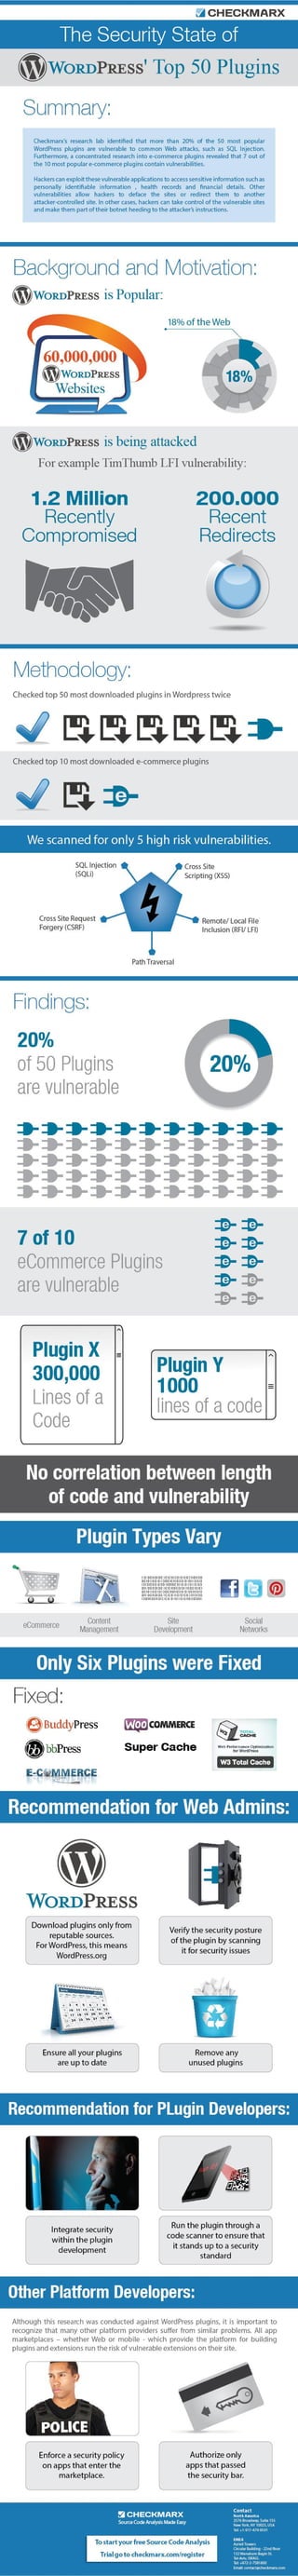 The Security State of The Most Popular WordPress Plug-Ins